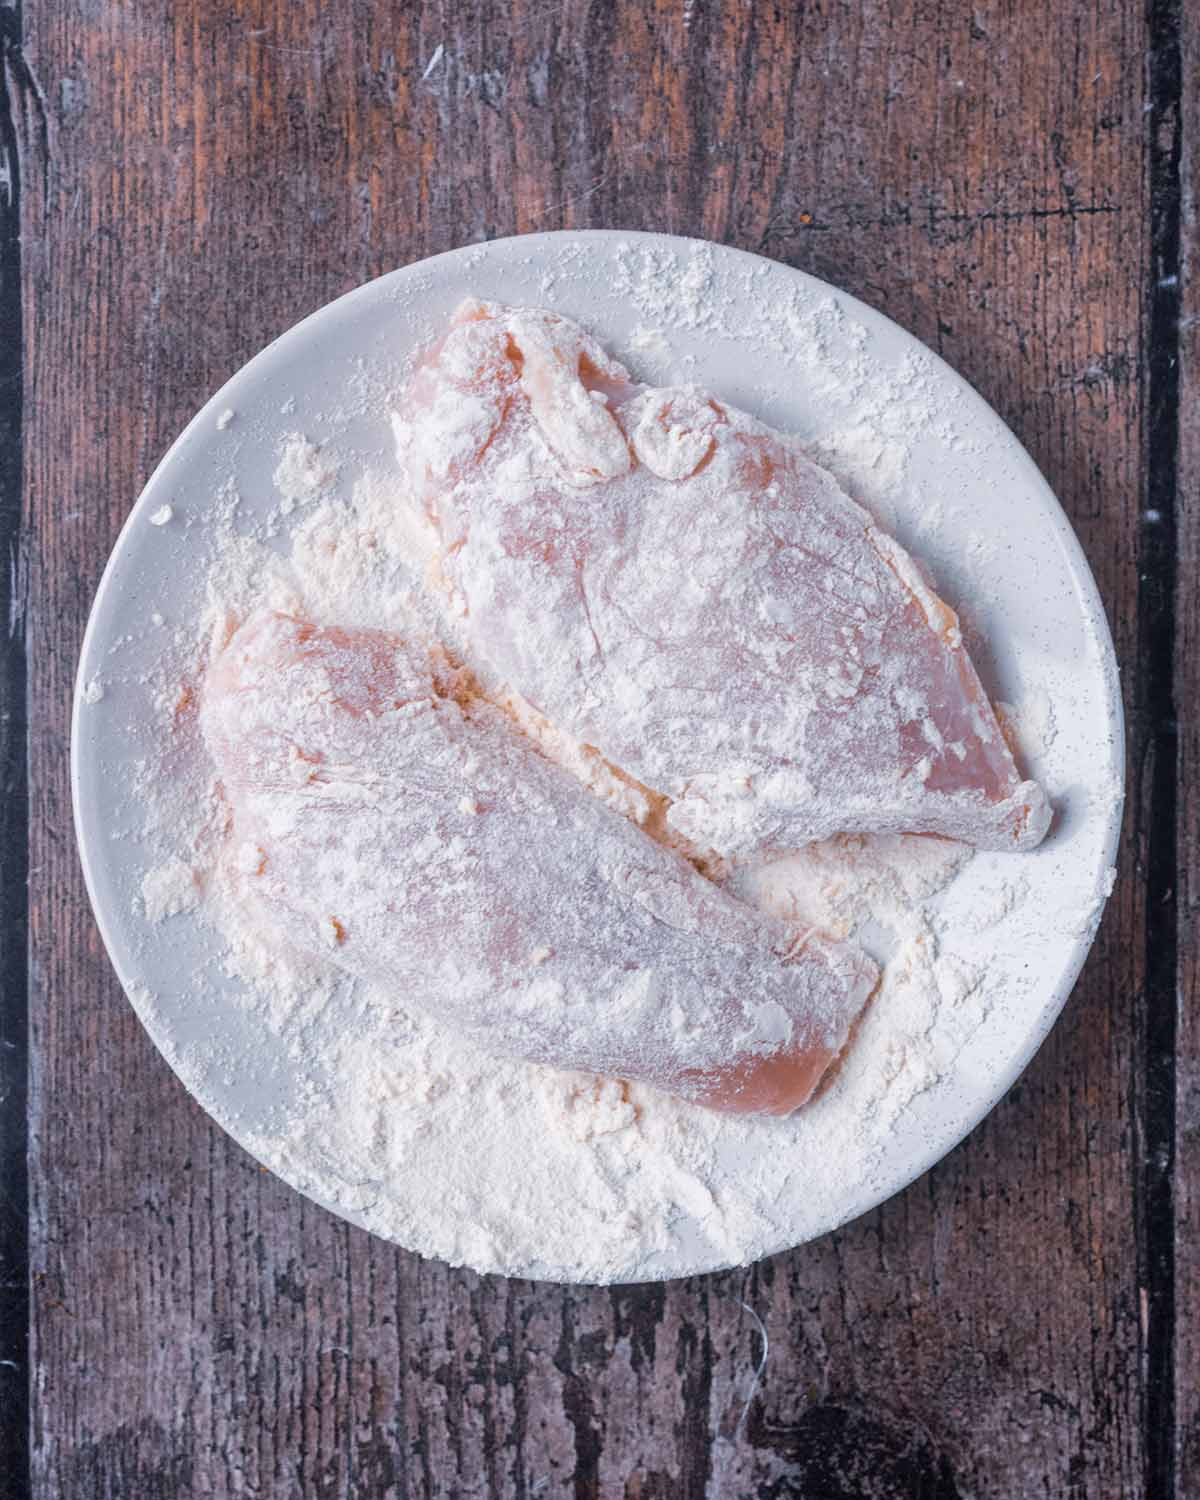 Chicken breasts coated in flour.